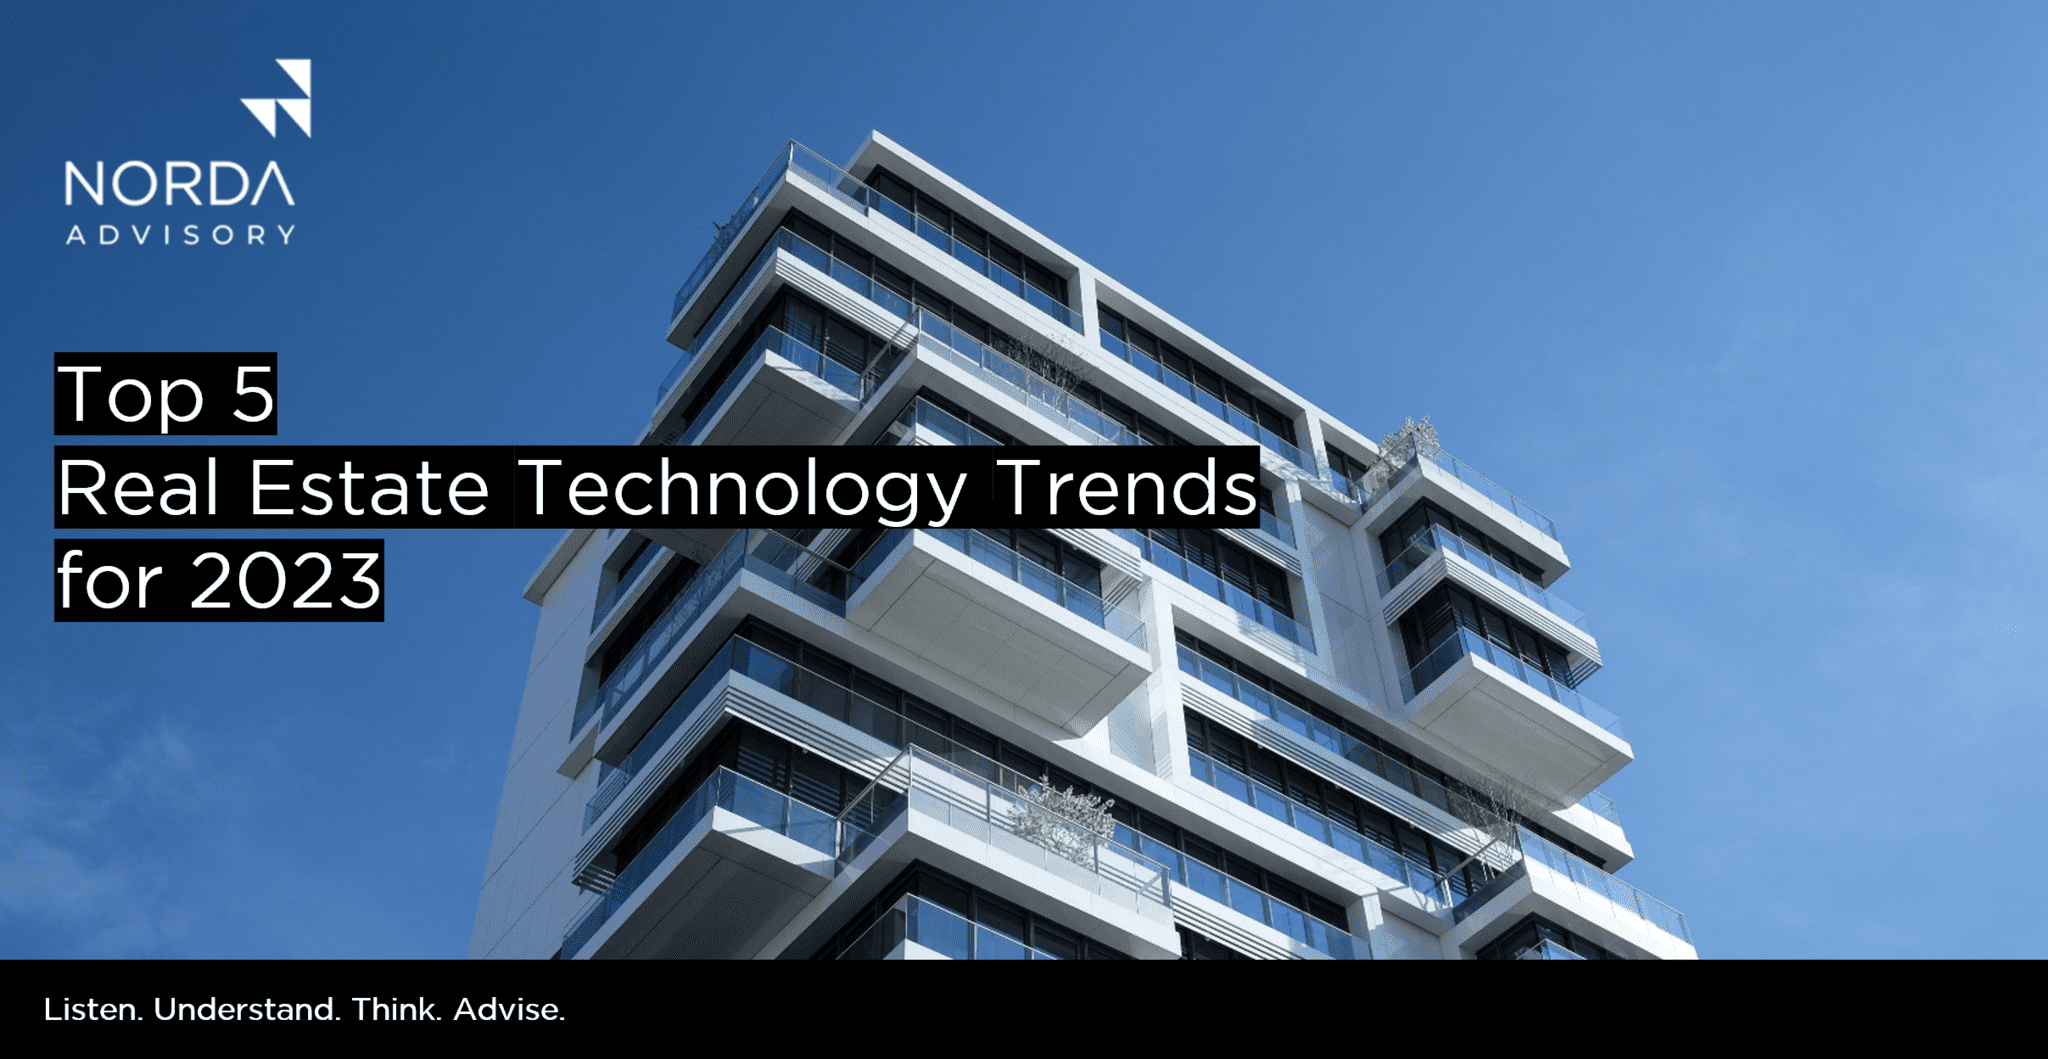 Top 5 Real Estate Technology Trends for 2023